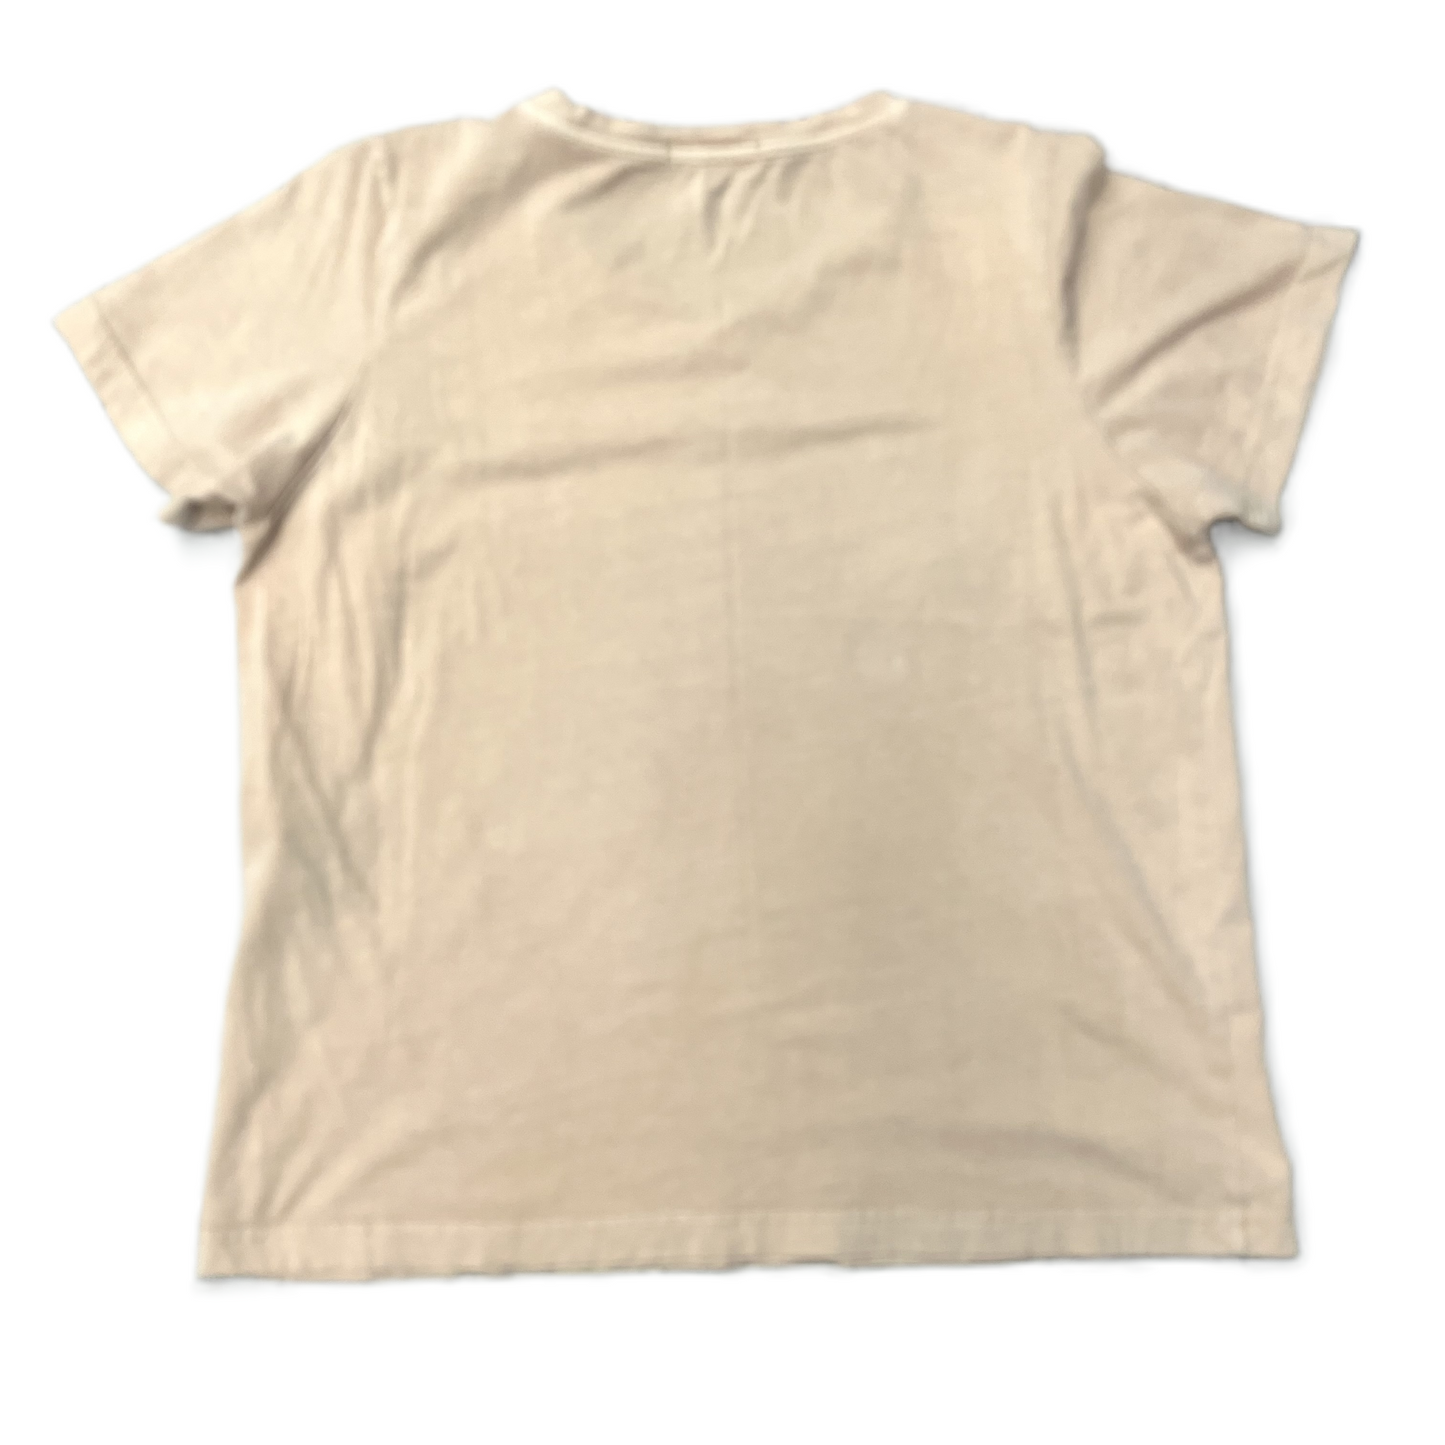 Tan Top Short Sleeve Designer By 7 For All Mankind, Size: L